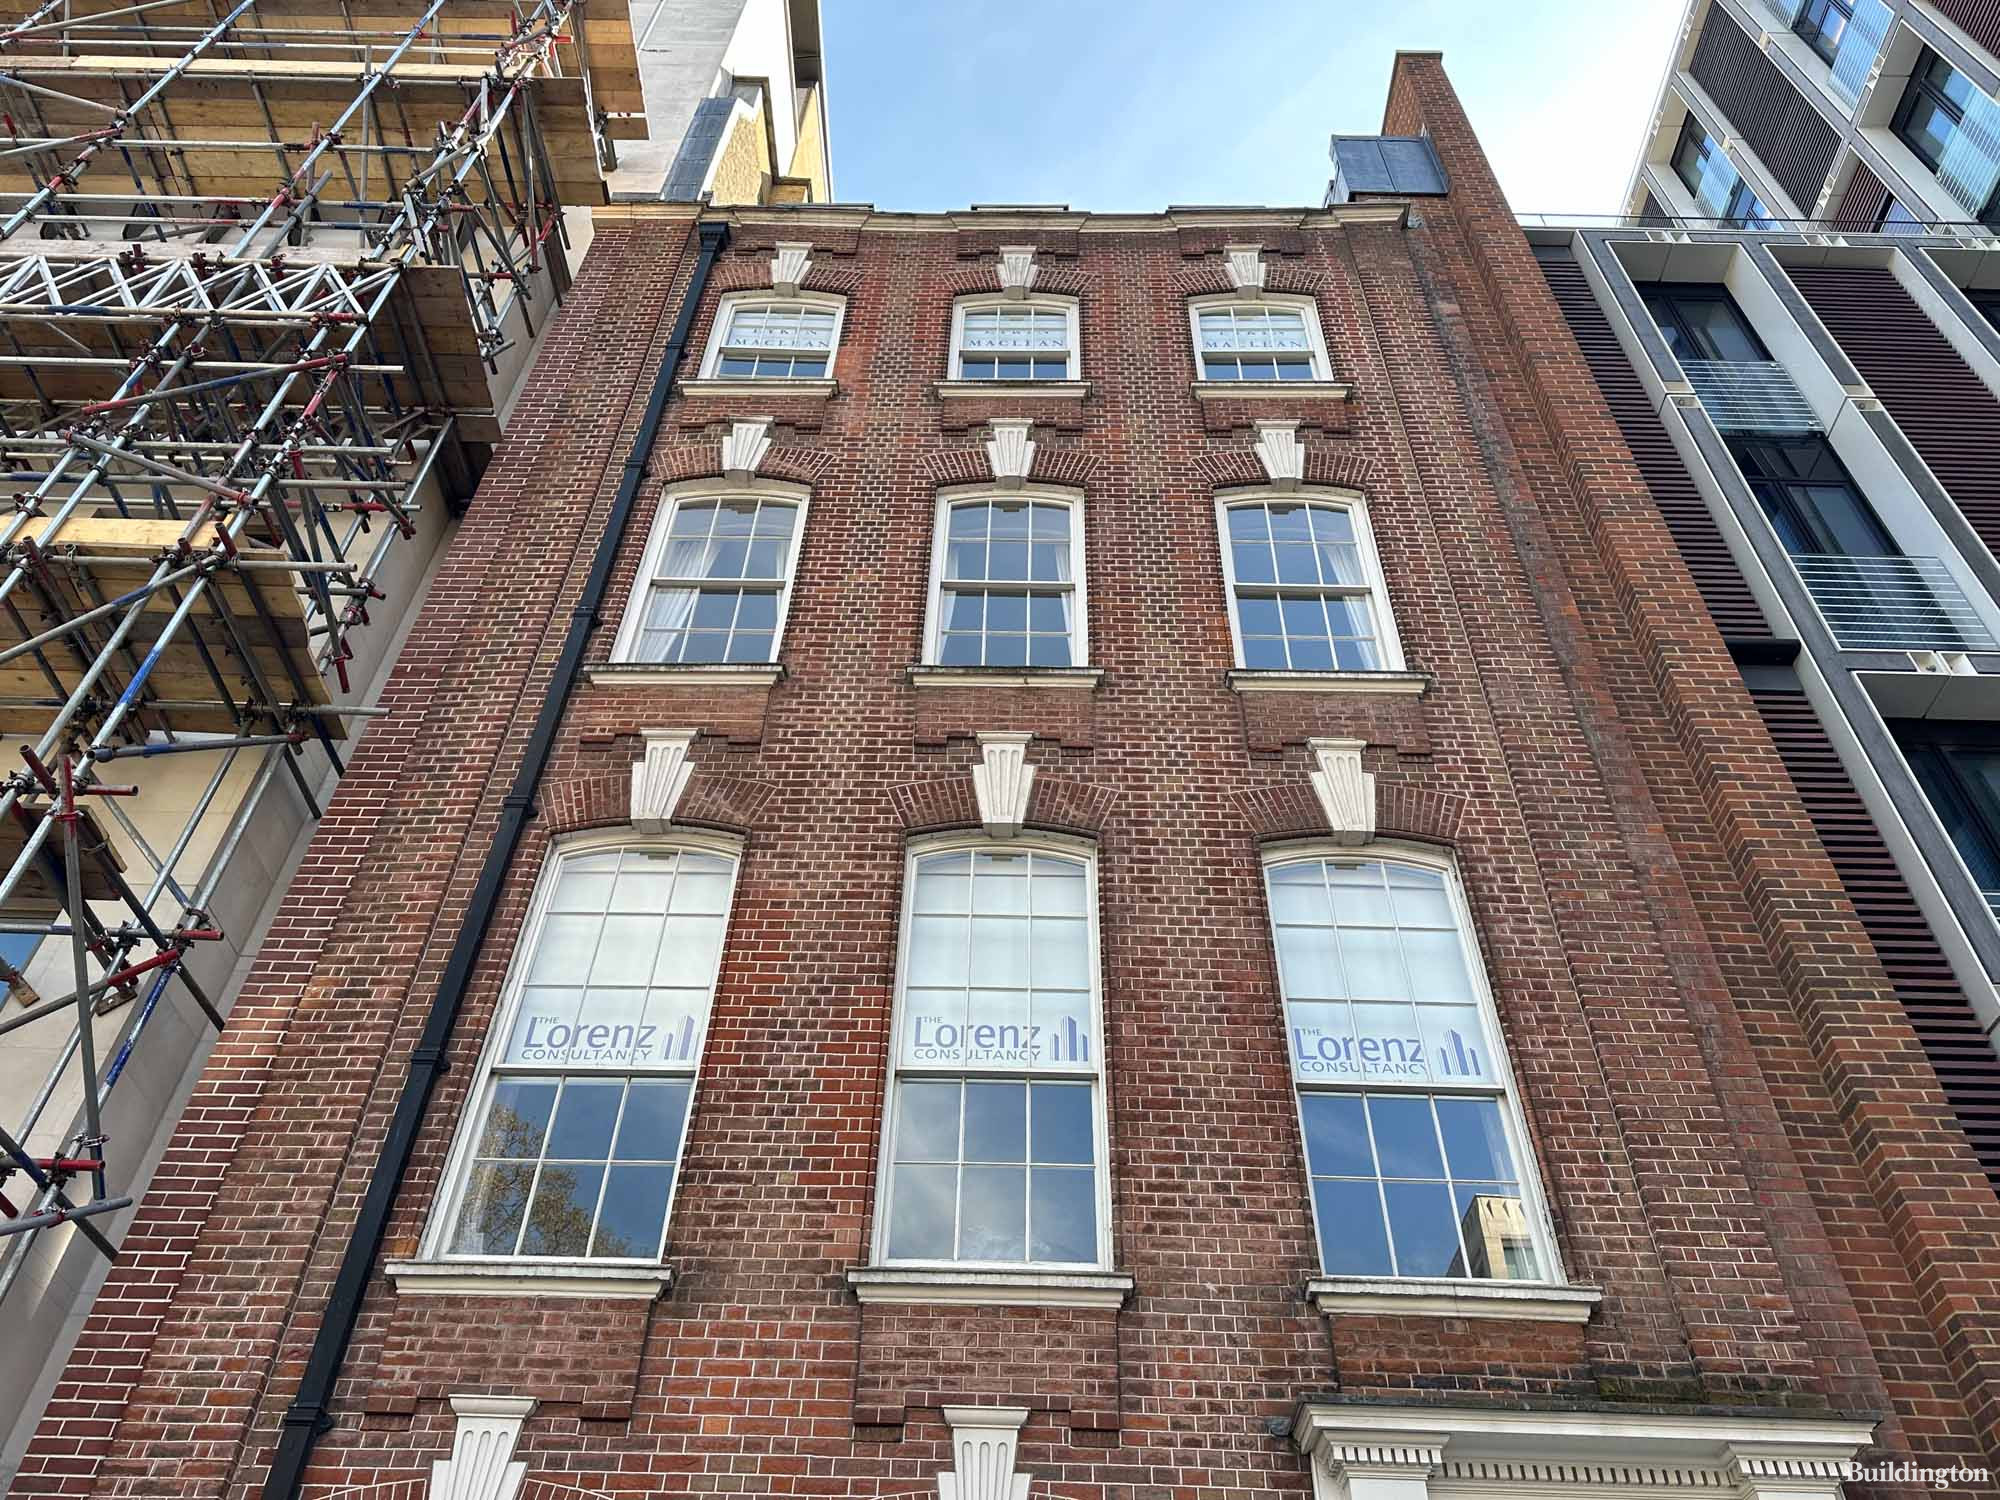 24 Hanover Square office building in Mayfair, London. W1